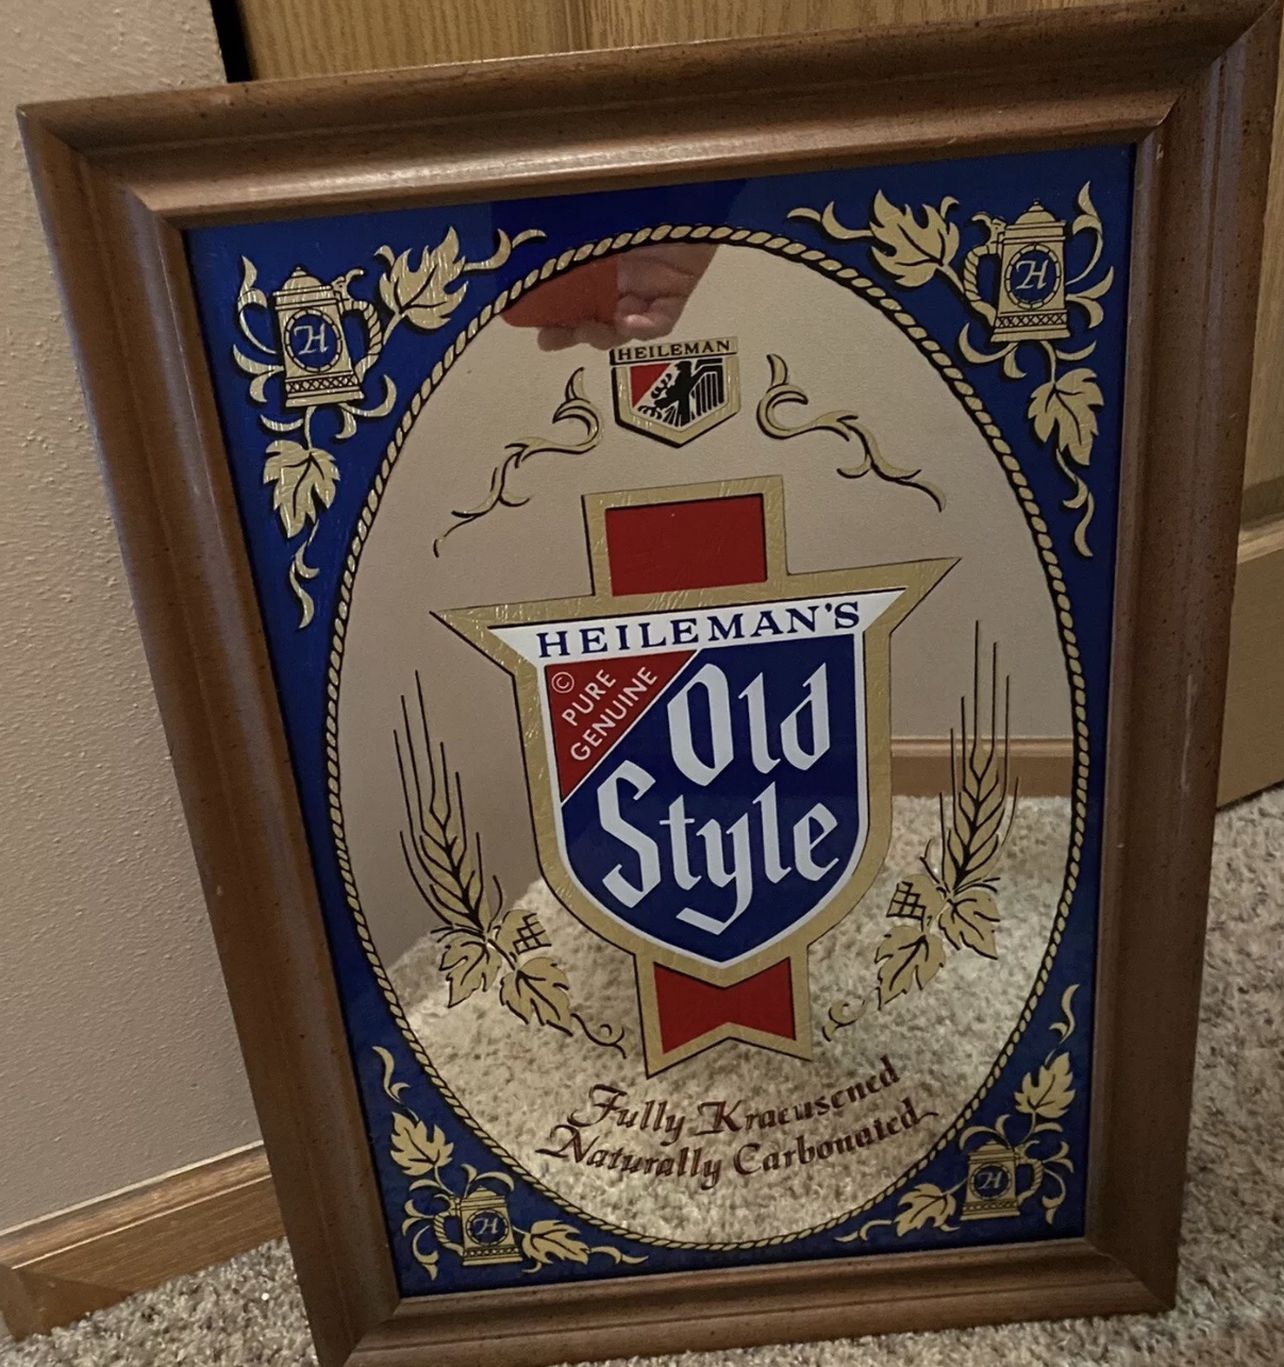 Vintage Old Style Beer Sign Mirror for Sale in Chicago, IL - OfferUp